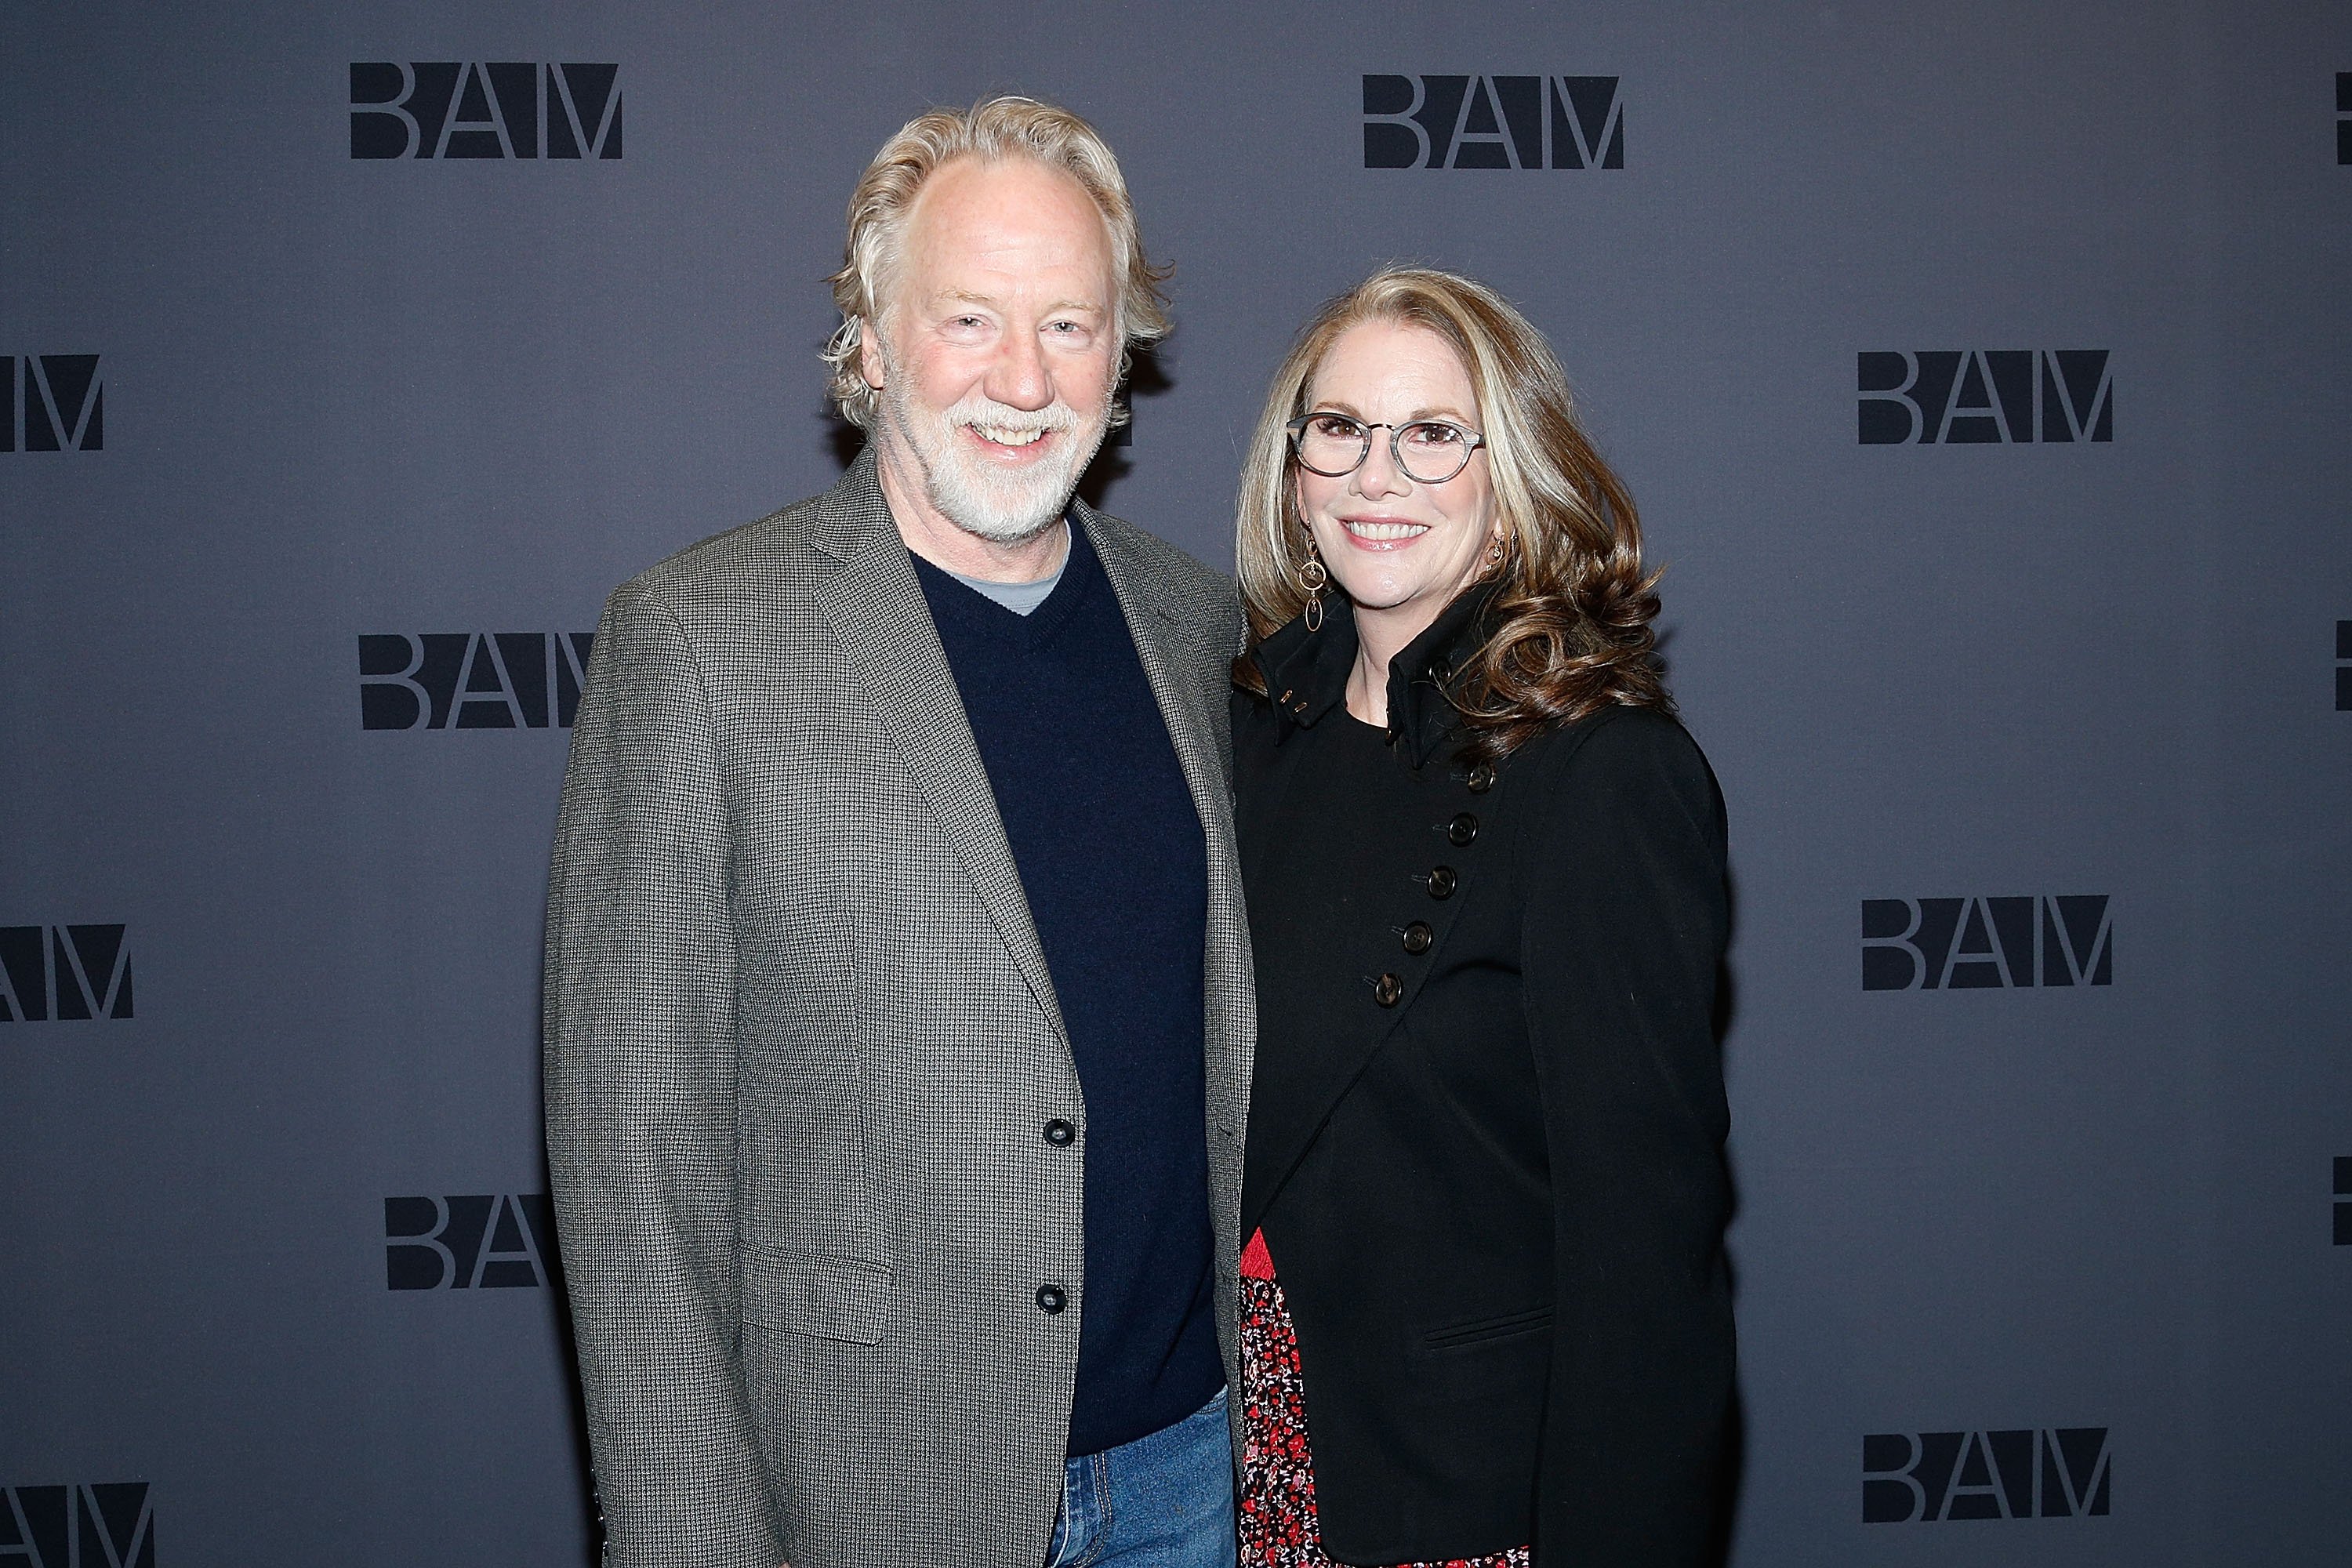 Timothy Busfield and his wife Melissa Gilbert during the opening night party for "Medea" at the BAM Harvey Theater on January 30, 2020 in New York City. / Source: Getty Images